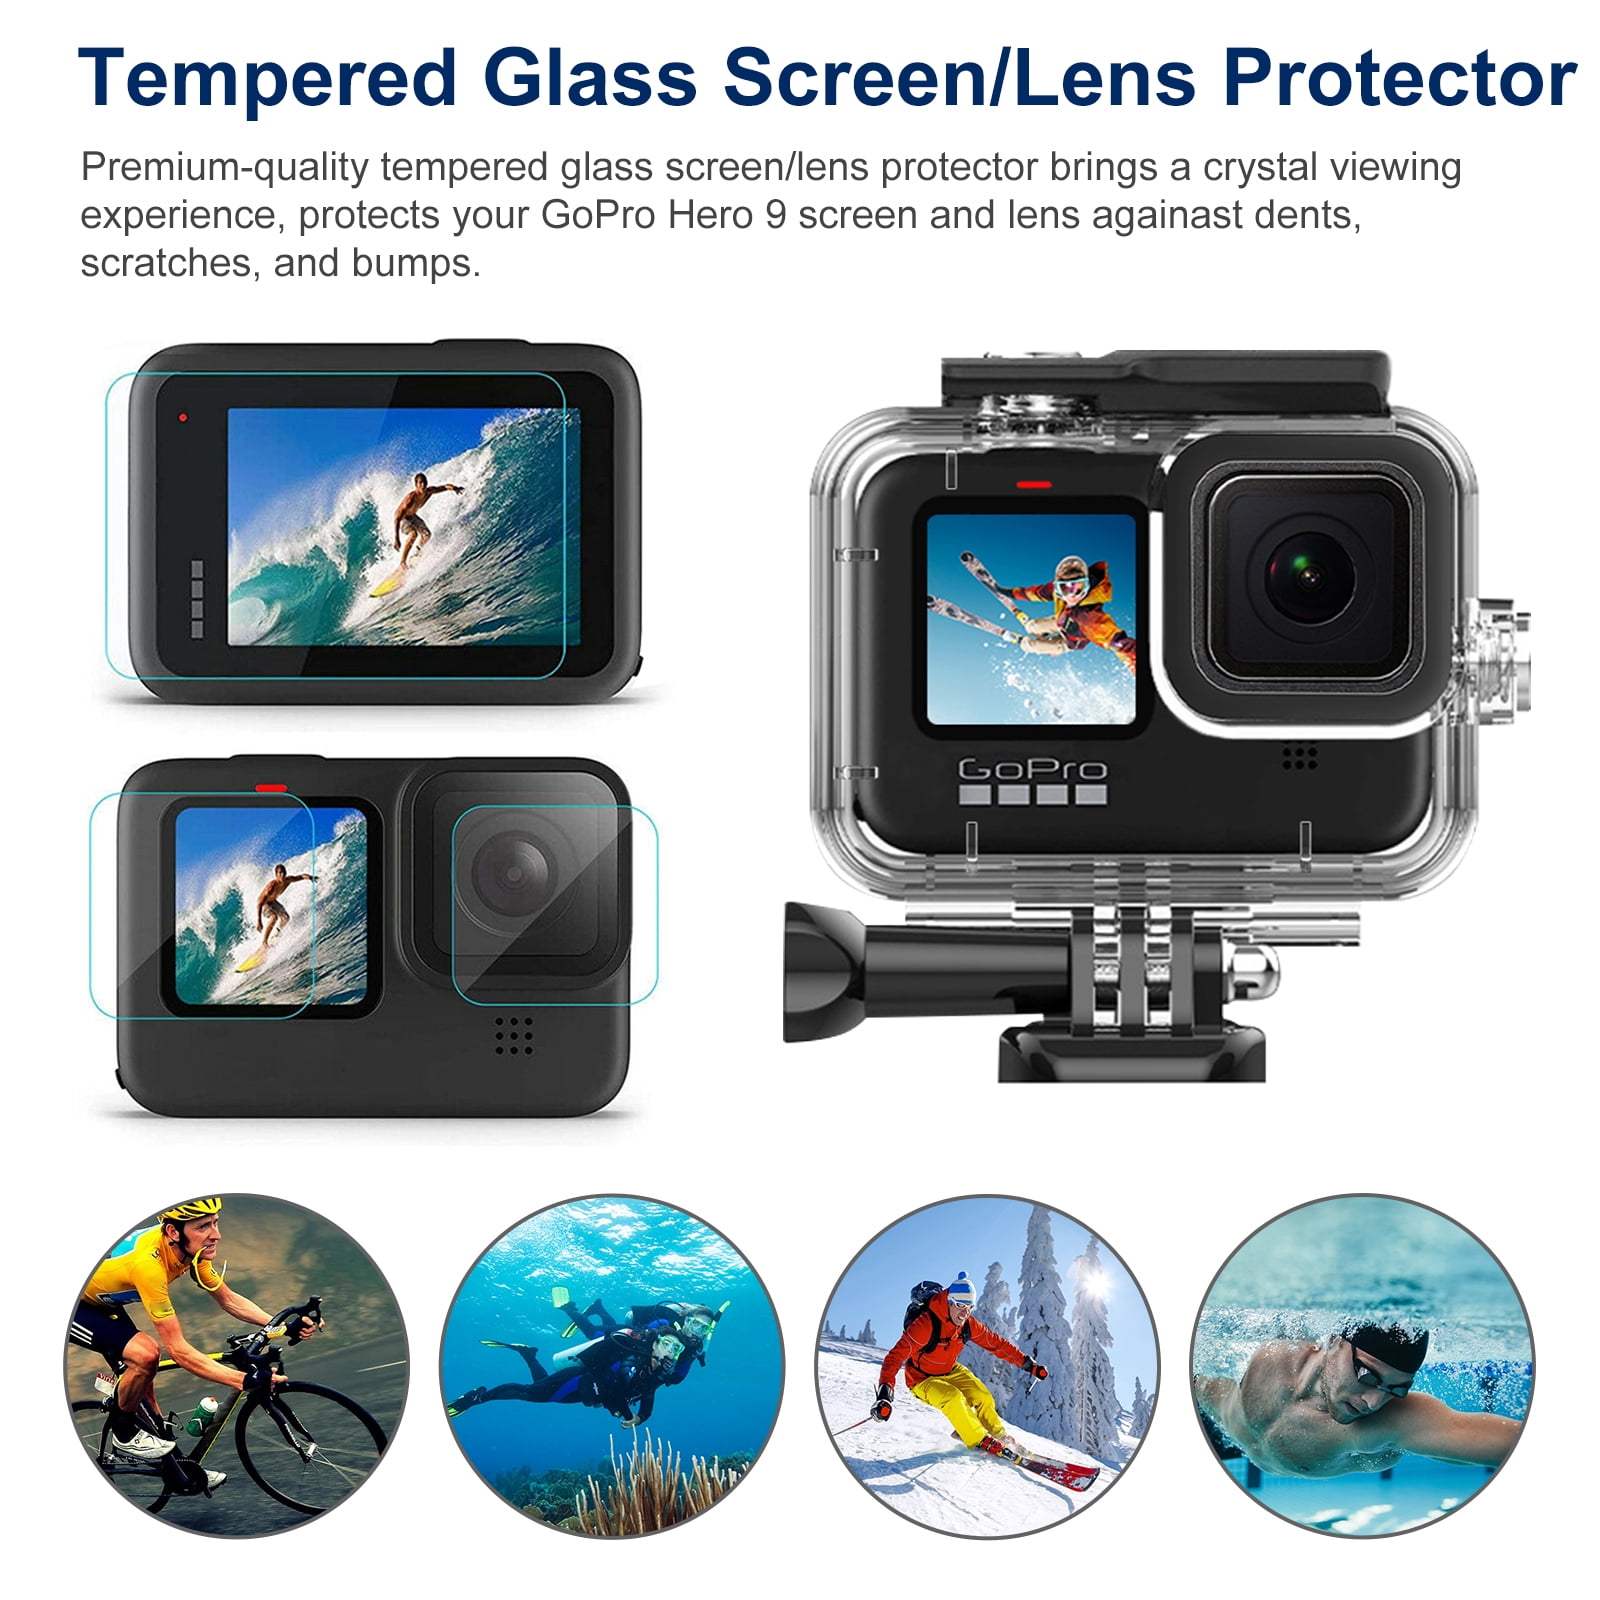 Pauplian Black case Accessories for GoPro Hero9+Battery Cover+3PCS Tempered Glass Screen Lens Protector+1PCS Lens Cap Cover for Hero9 Housing Border Protective with Quick Pull Movable Socket and Screw